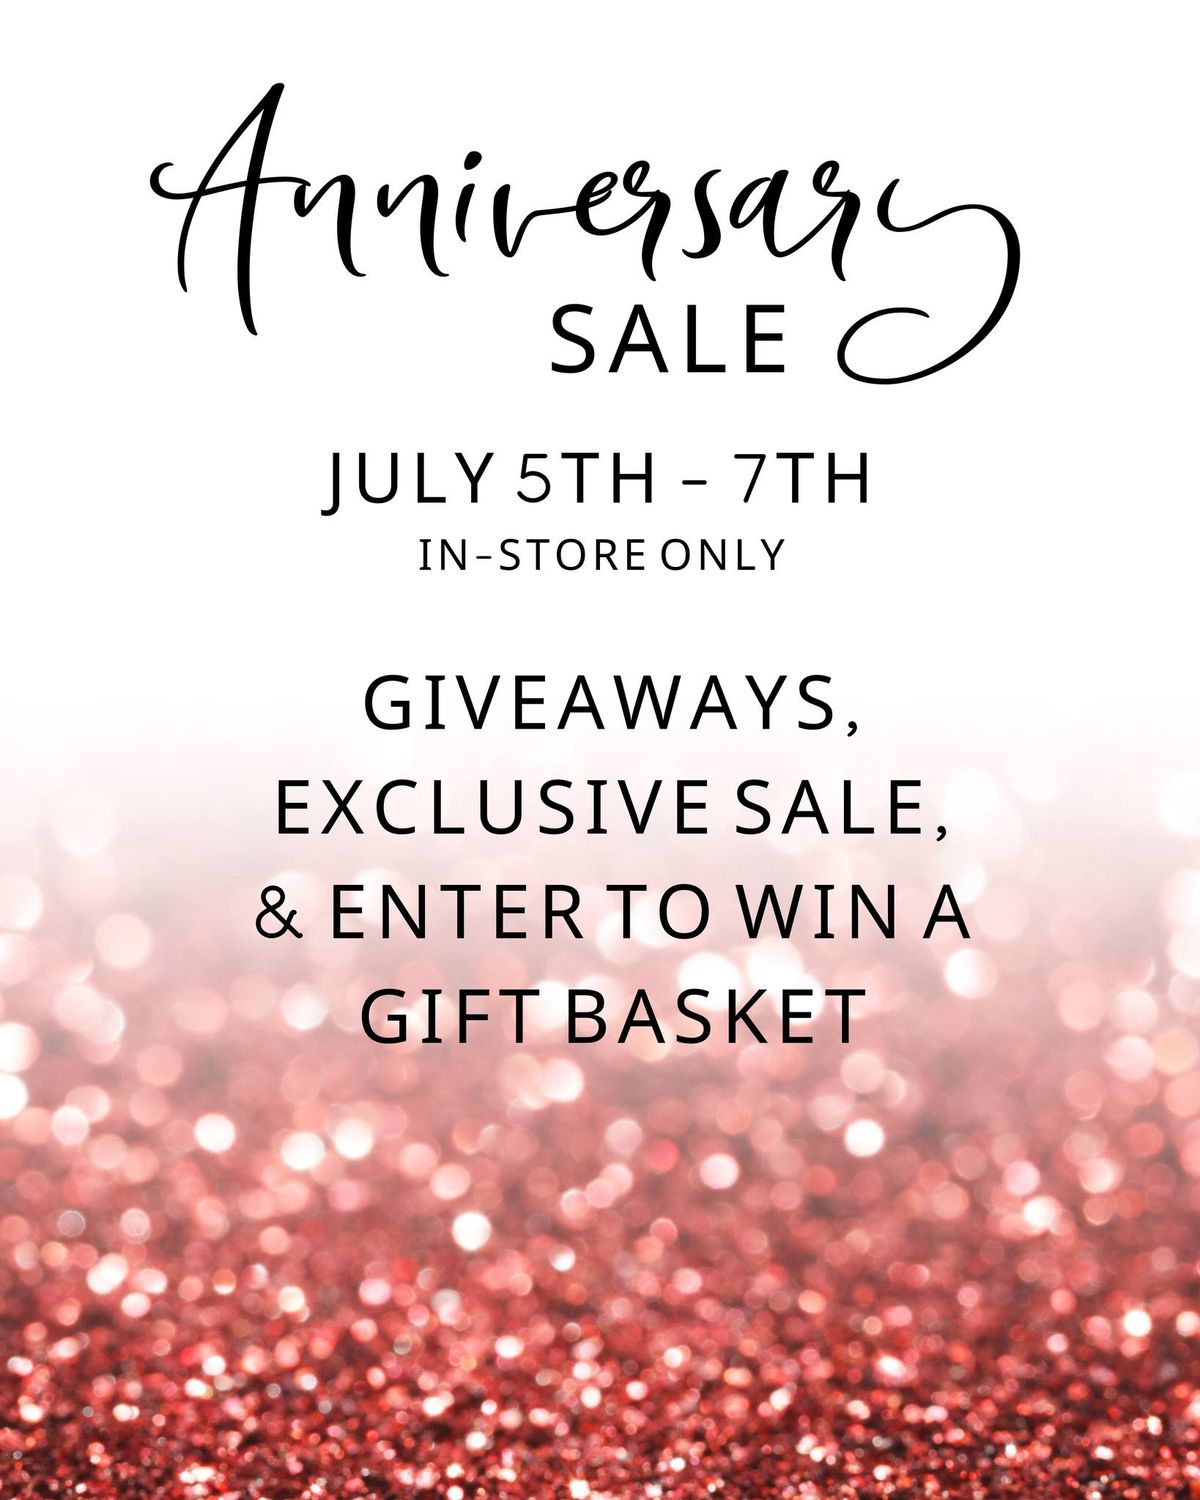 One Year Anniversary - Lindale Mall Location